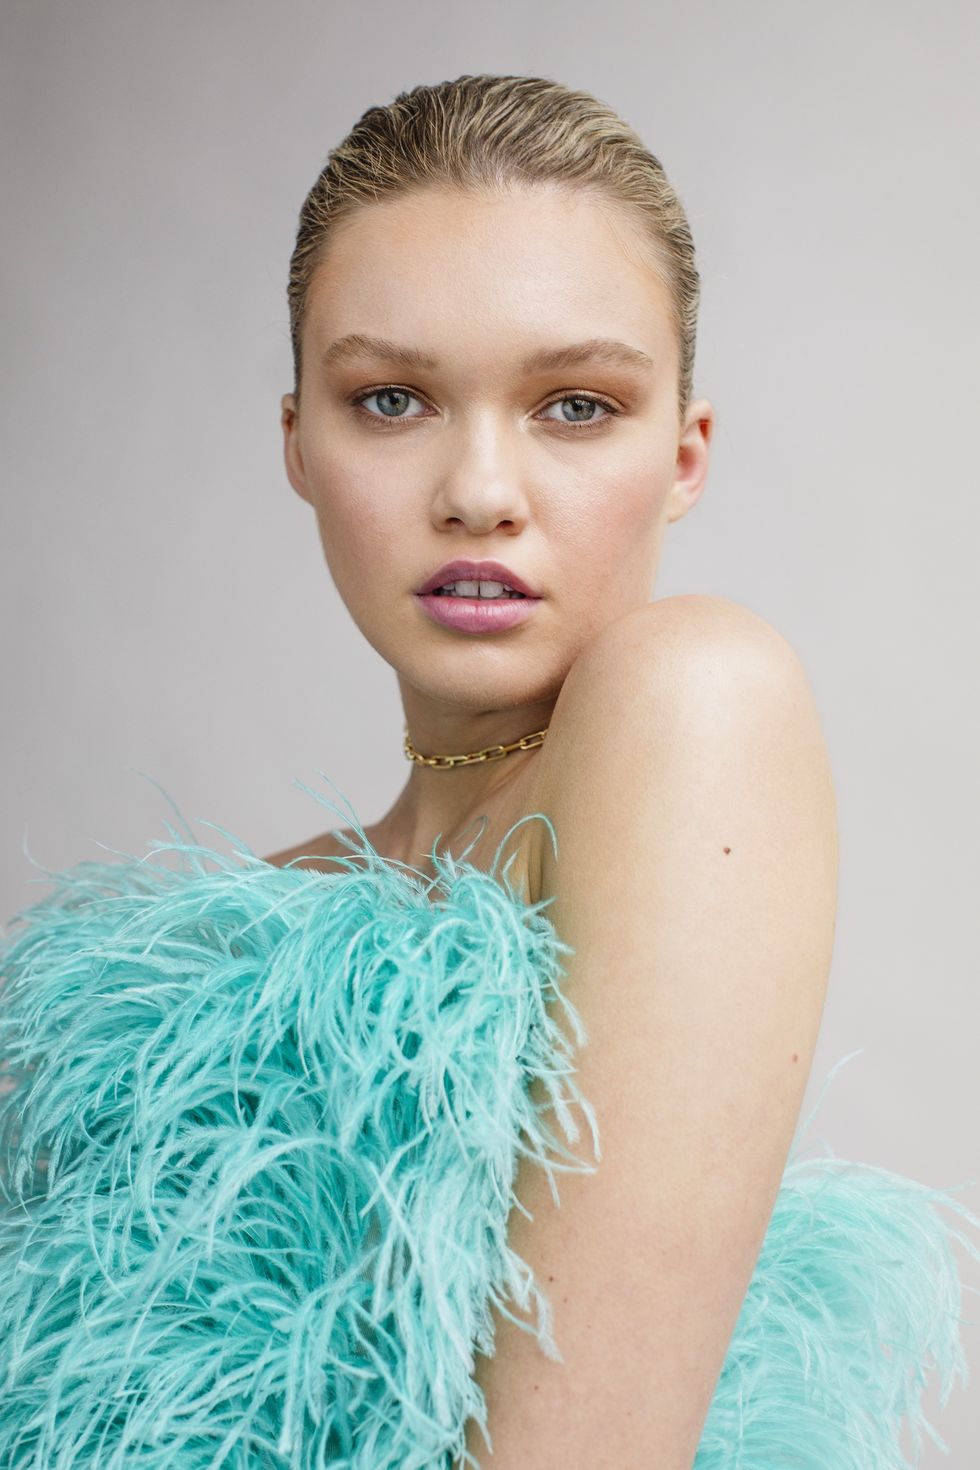 Hair, Face, Skin, Eyebrow, Hairstyle, Beauty, Turquoise, Lip, Blond, Fashion, 